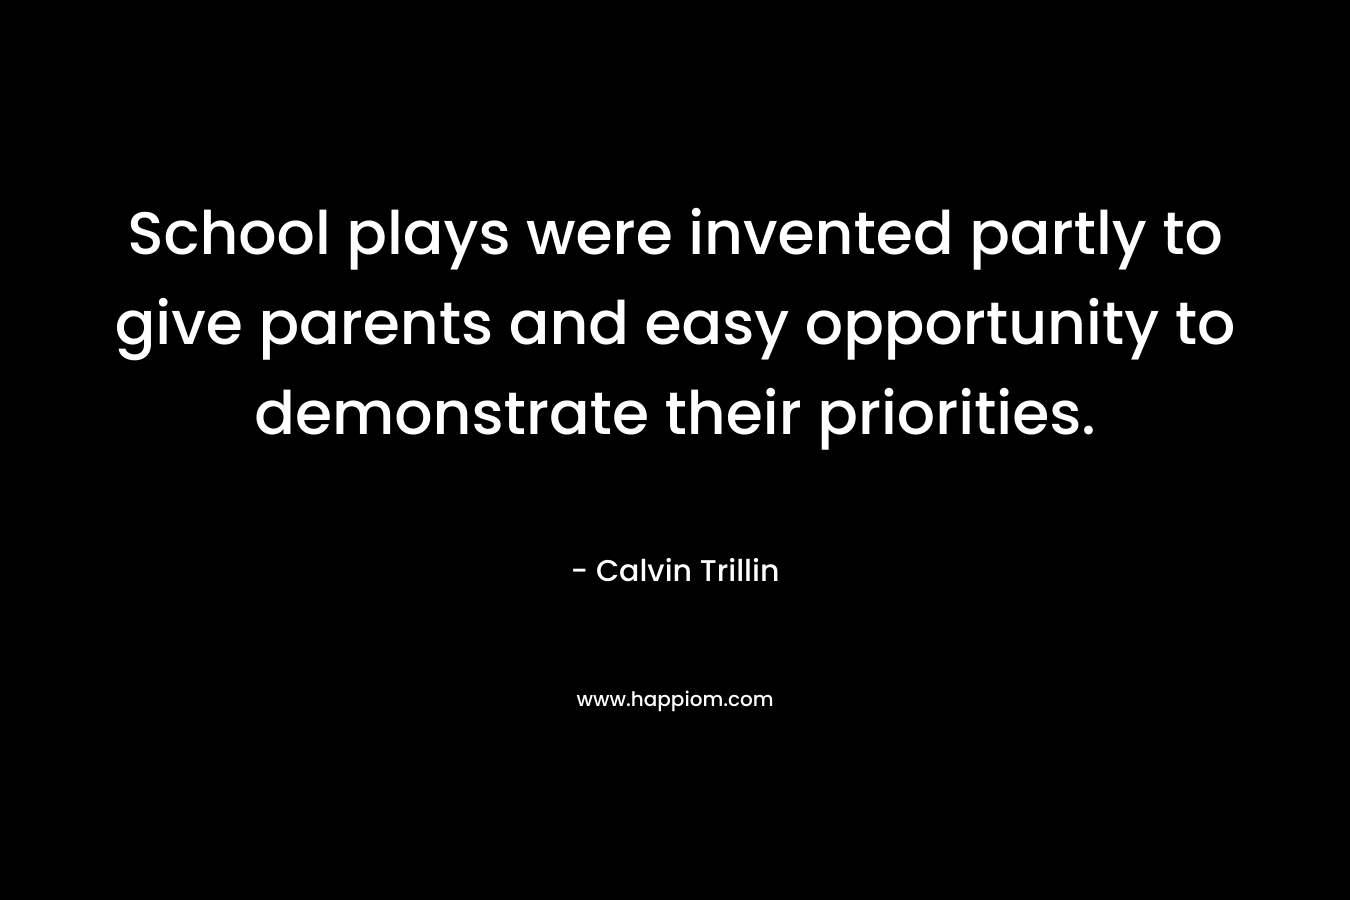 School plays were invented partly to give parents and easy opportunity to demonstrate their priorities. – Calvin Trillin